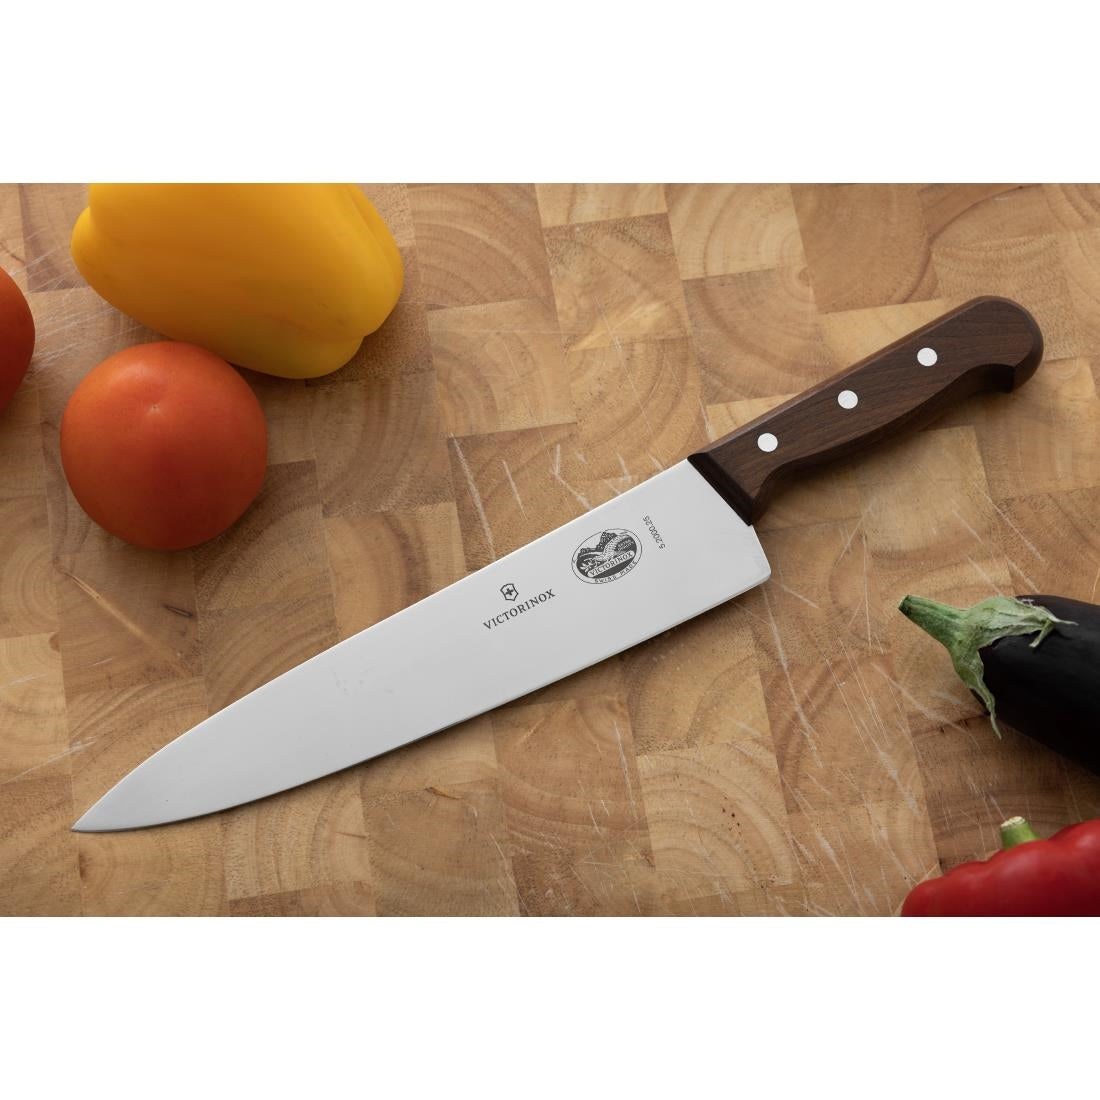 C606 Victorinox Wooden Handled Carving Knife 25cm